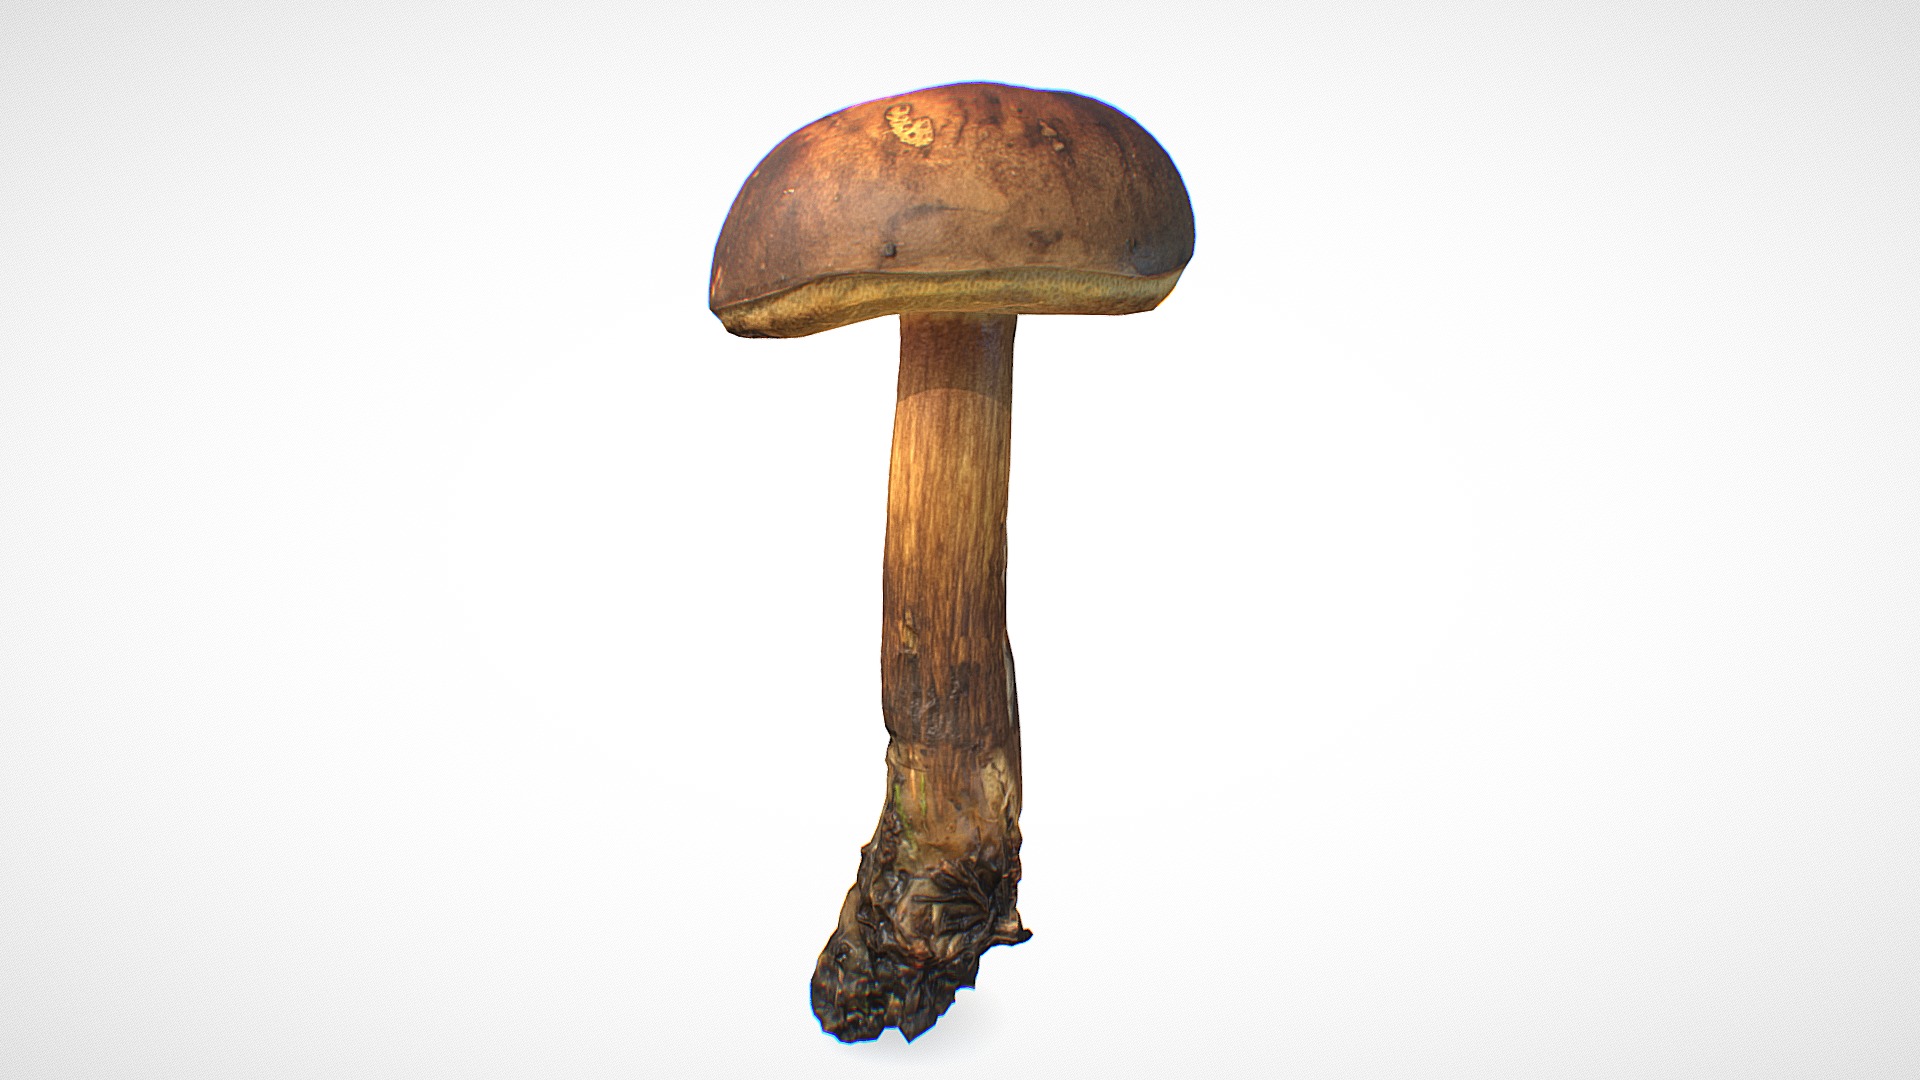 3D model Xerocomus mushroom 11 – retopo 8K PBR - This is a 3D model of the Xerocomus mushroom 11 - retopo 8K PBR. The 3D model is about a wood stick with a brown top.